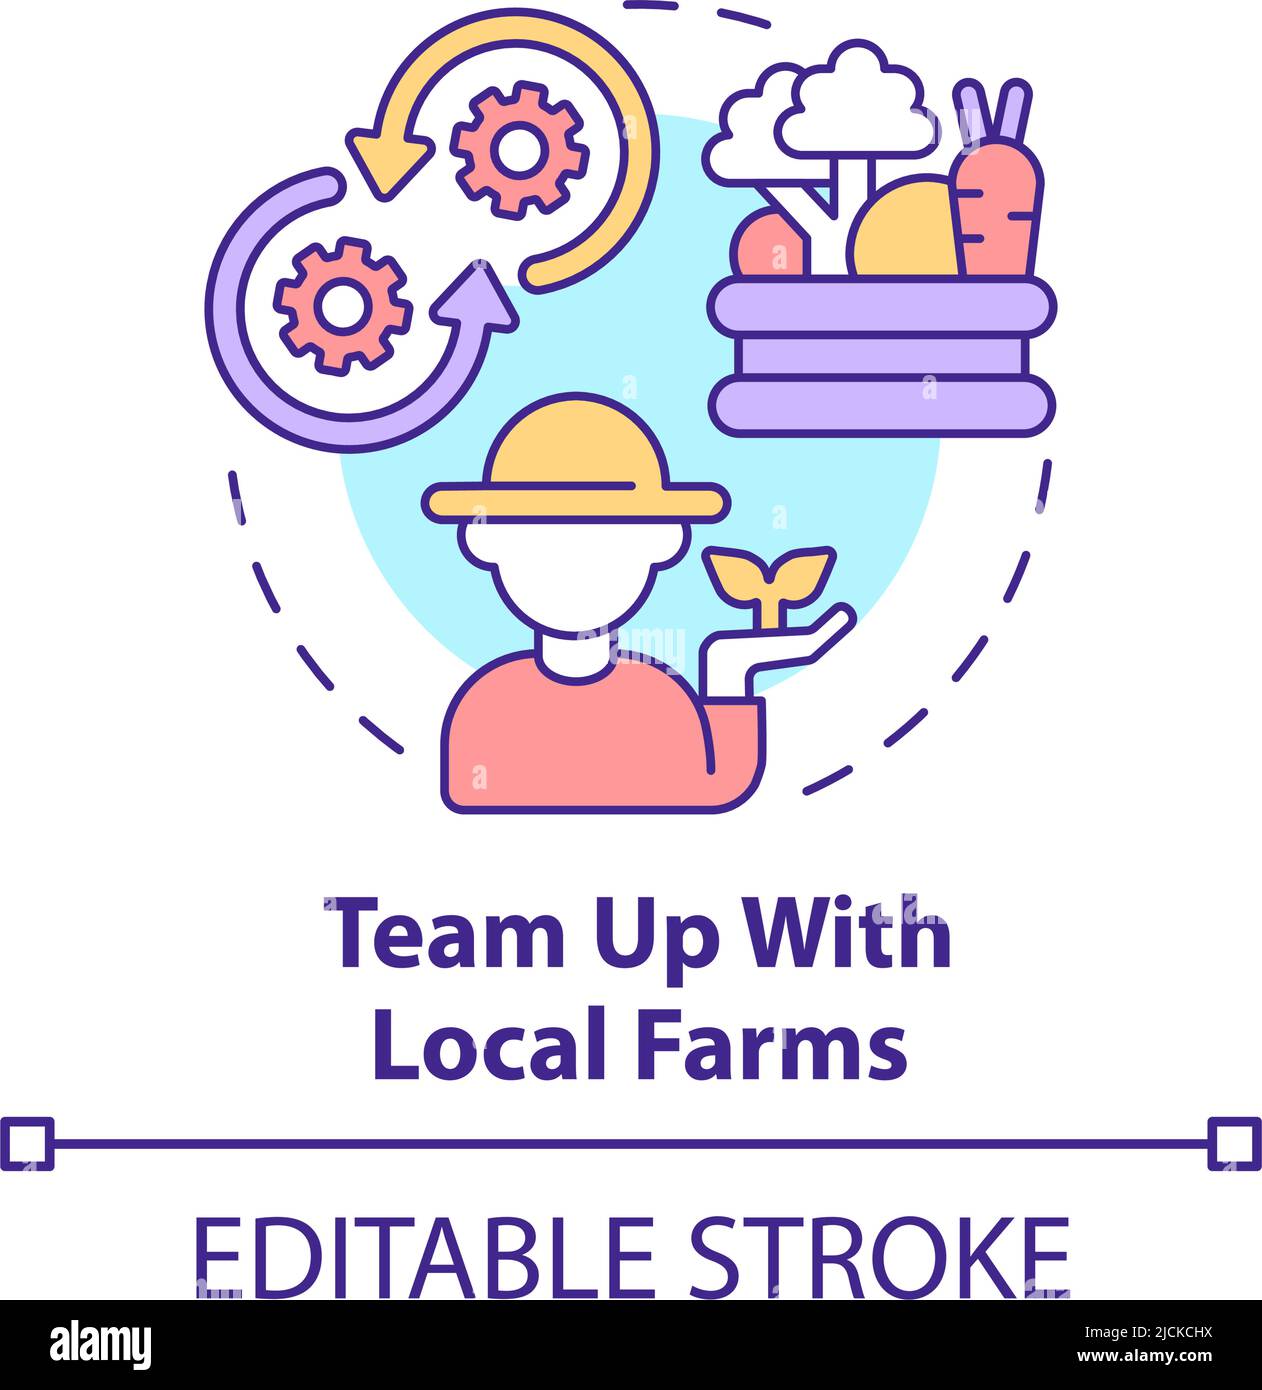 Team up with local farms concept icon Stock Vector